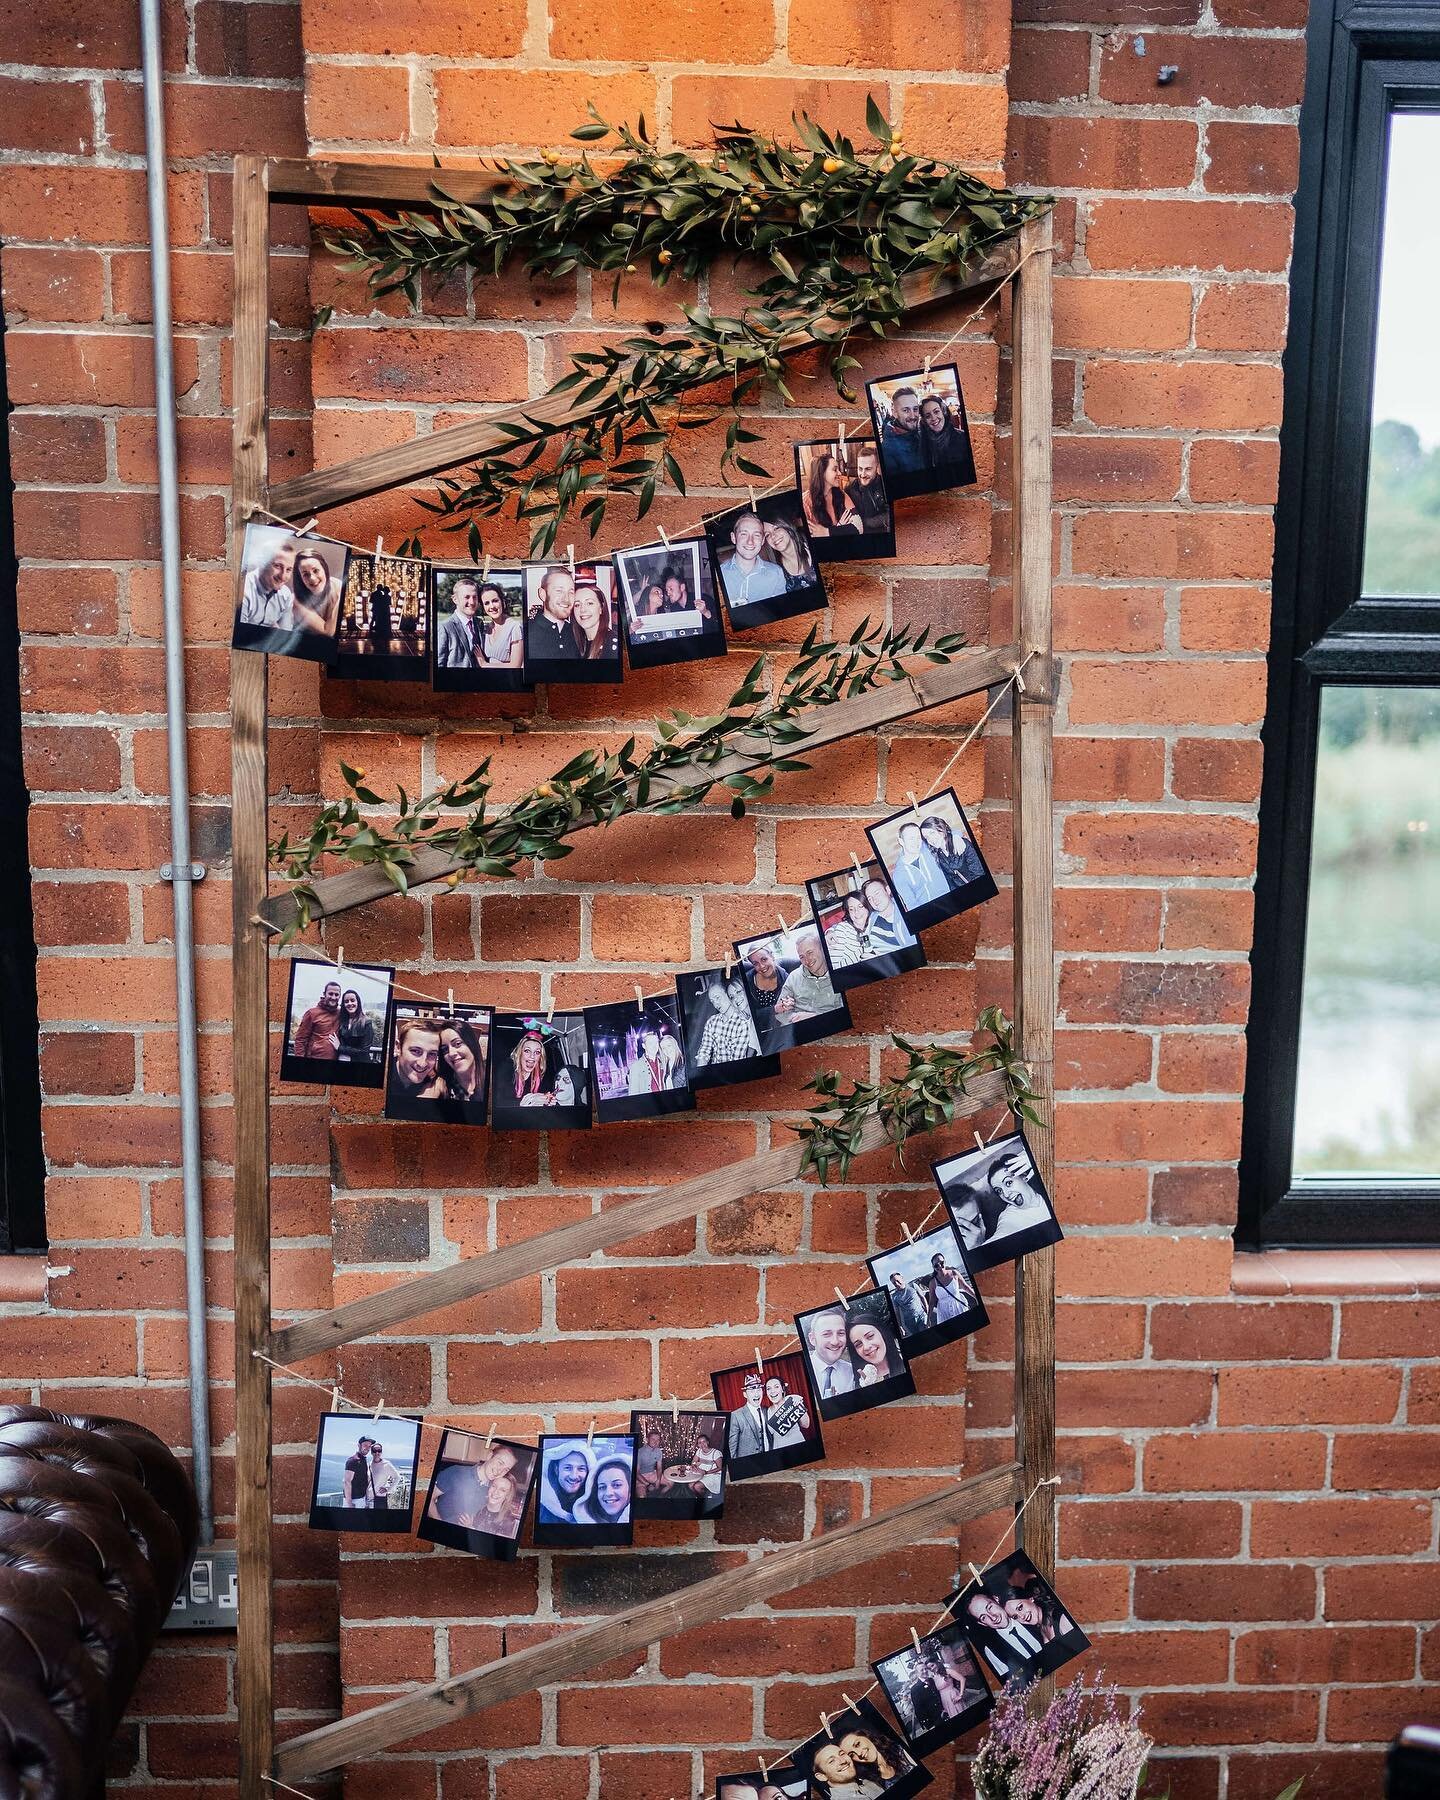 Photo displays. 📸 A little detail for an extra special personal touch. A simple decor piece to make a corner of your venue that extra bit special. 
.
. 
Photo but @joss_denham_photography  #weddingphotos #photodisplay #rusticphotodisplay #weddingdec